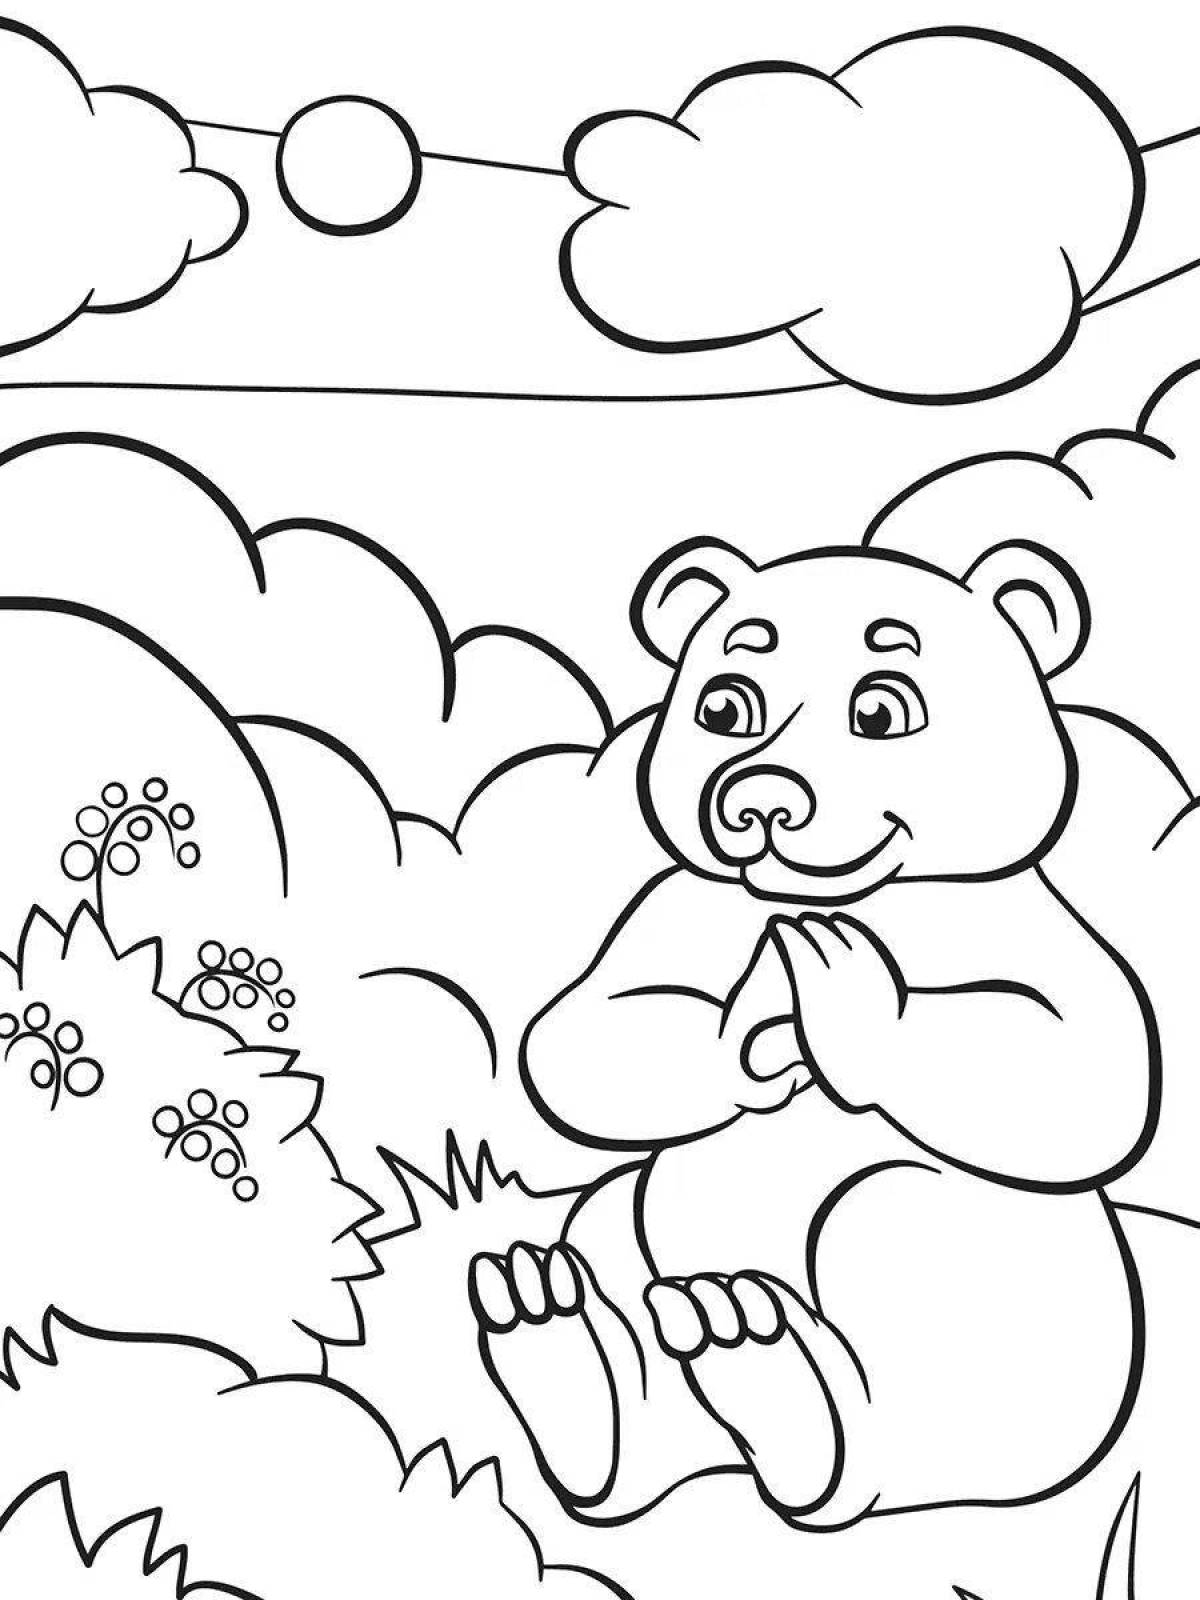 Glittering mouse and bear coloring page